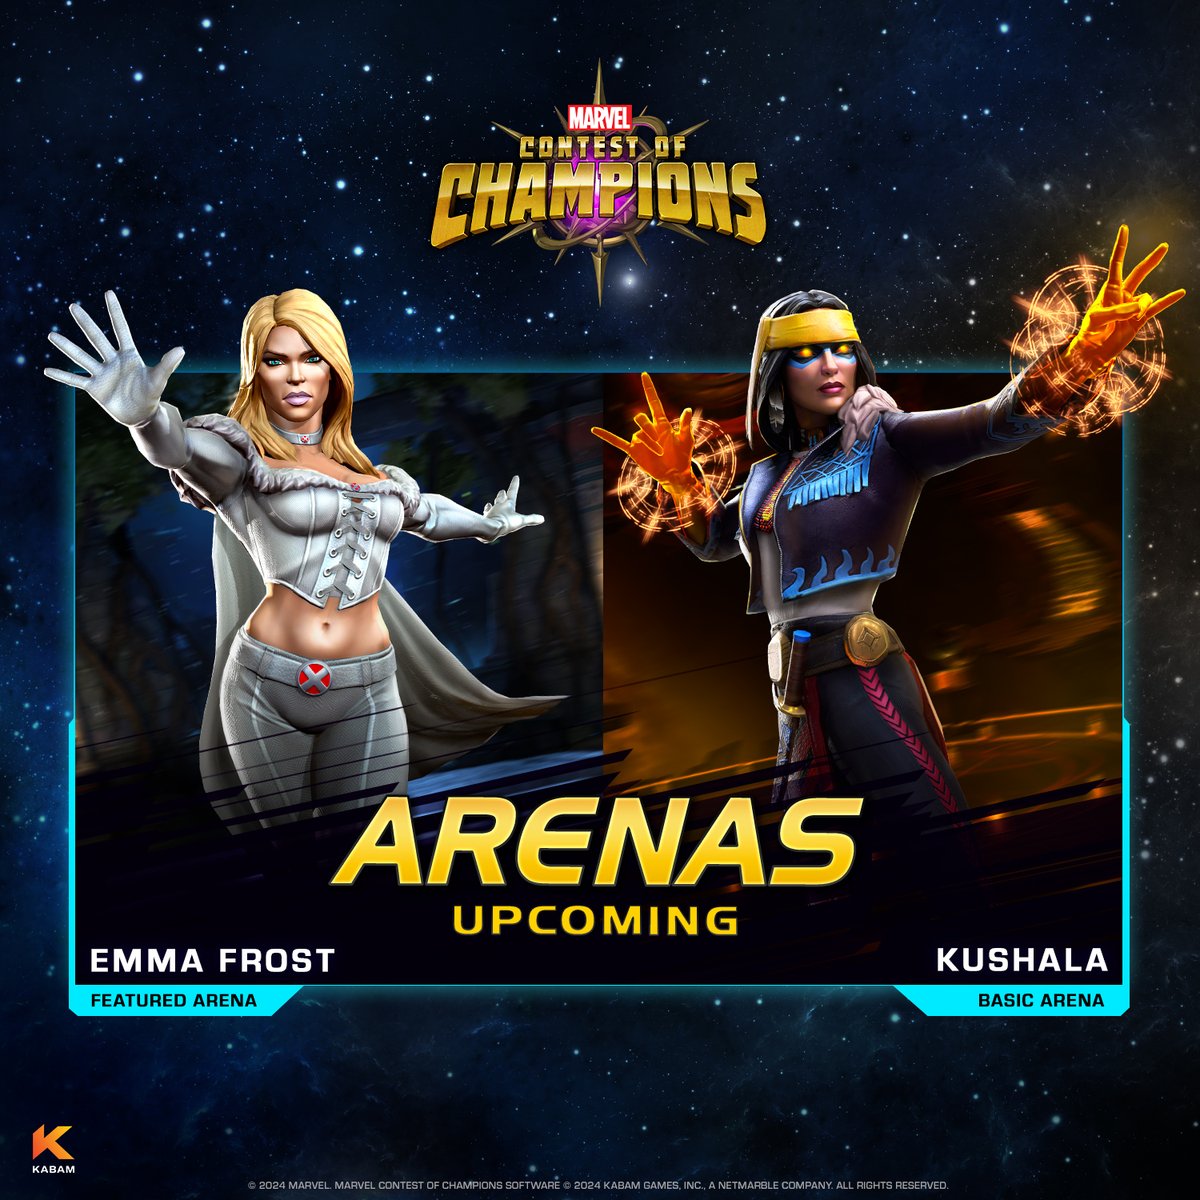 🚨 Exciting Arenas Ahead 🚨 Featured ➡️ Emma Frost Basic ➡️ Kushala Launching on May 9